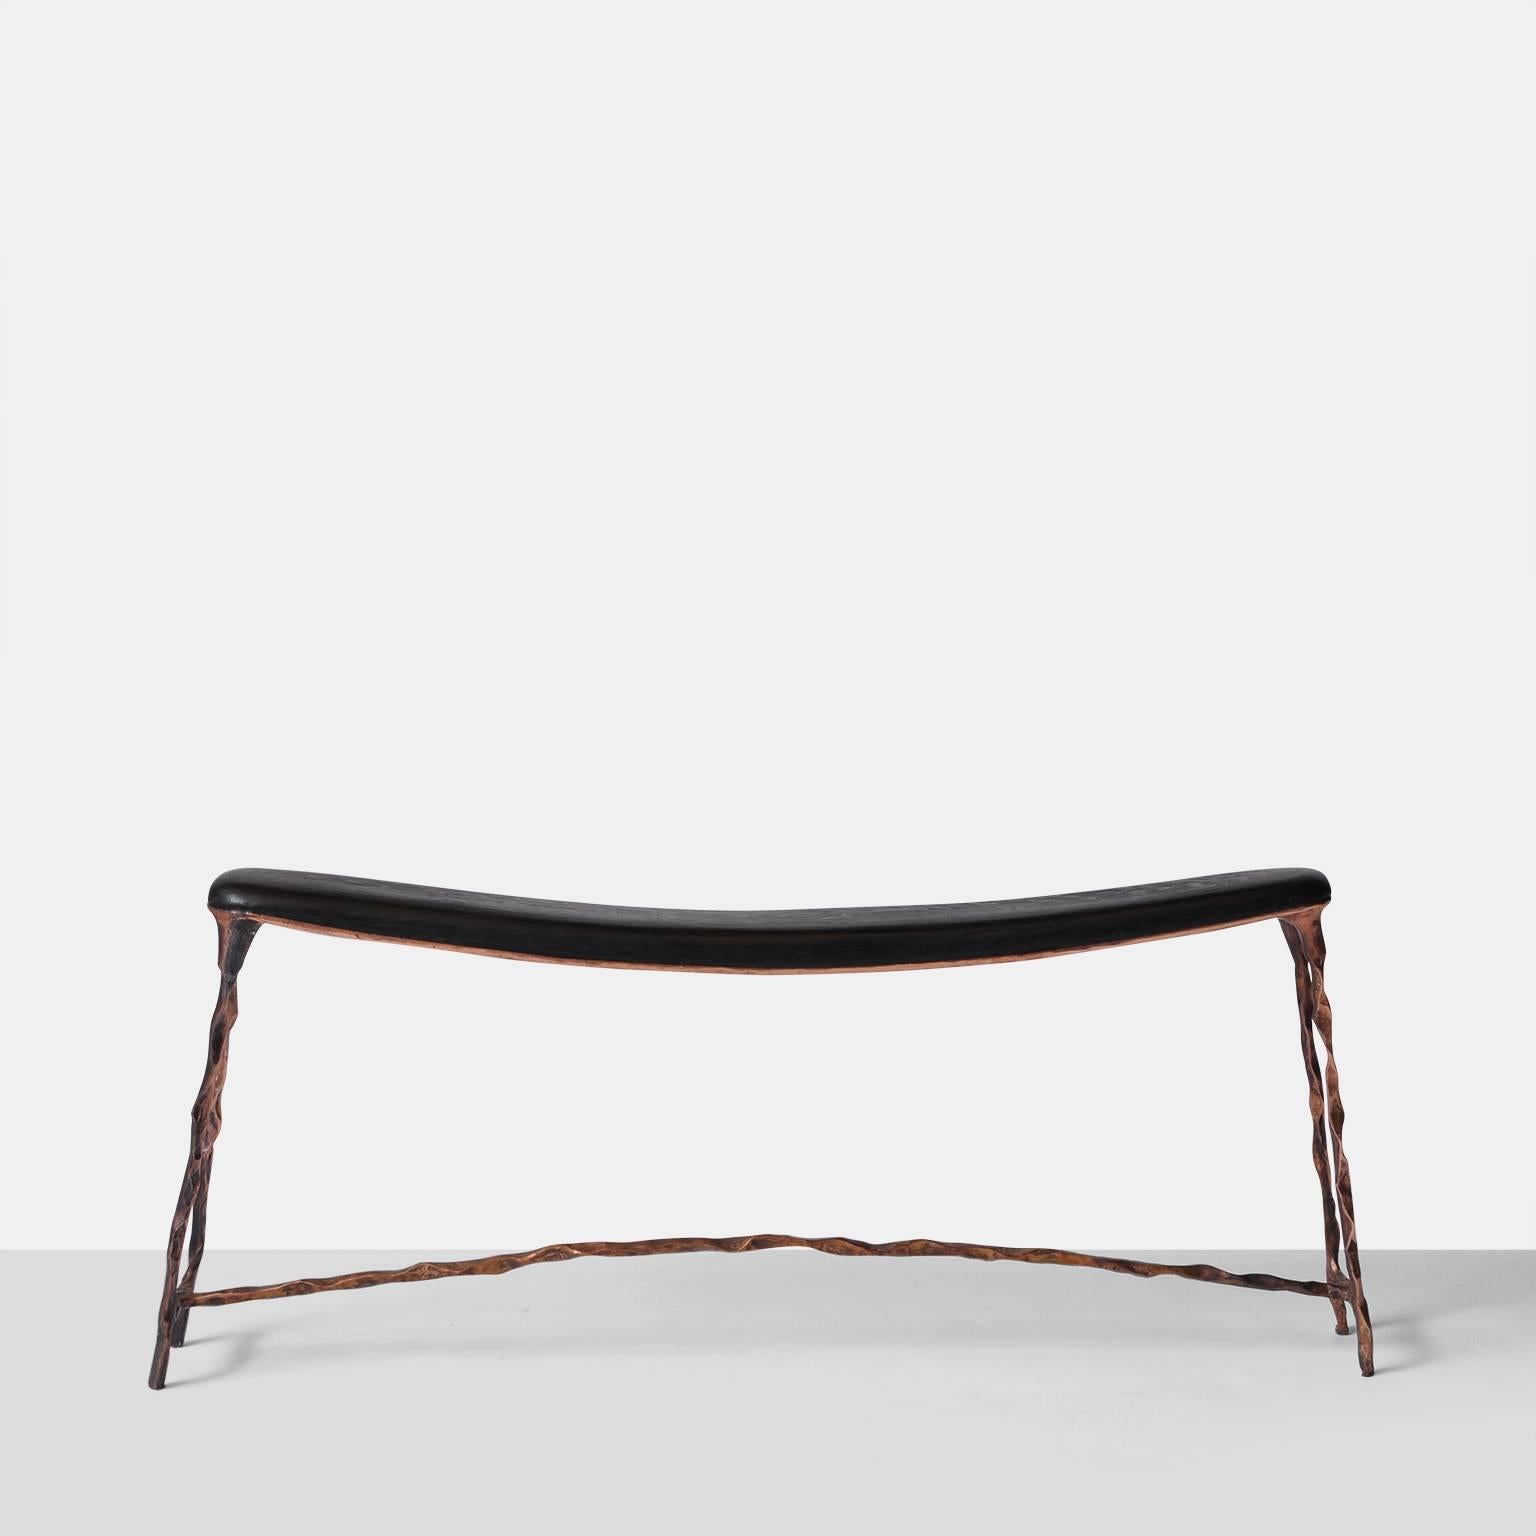 Dutch Small Bended Copper Bench by Valentin Loellmann